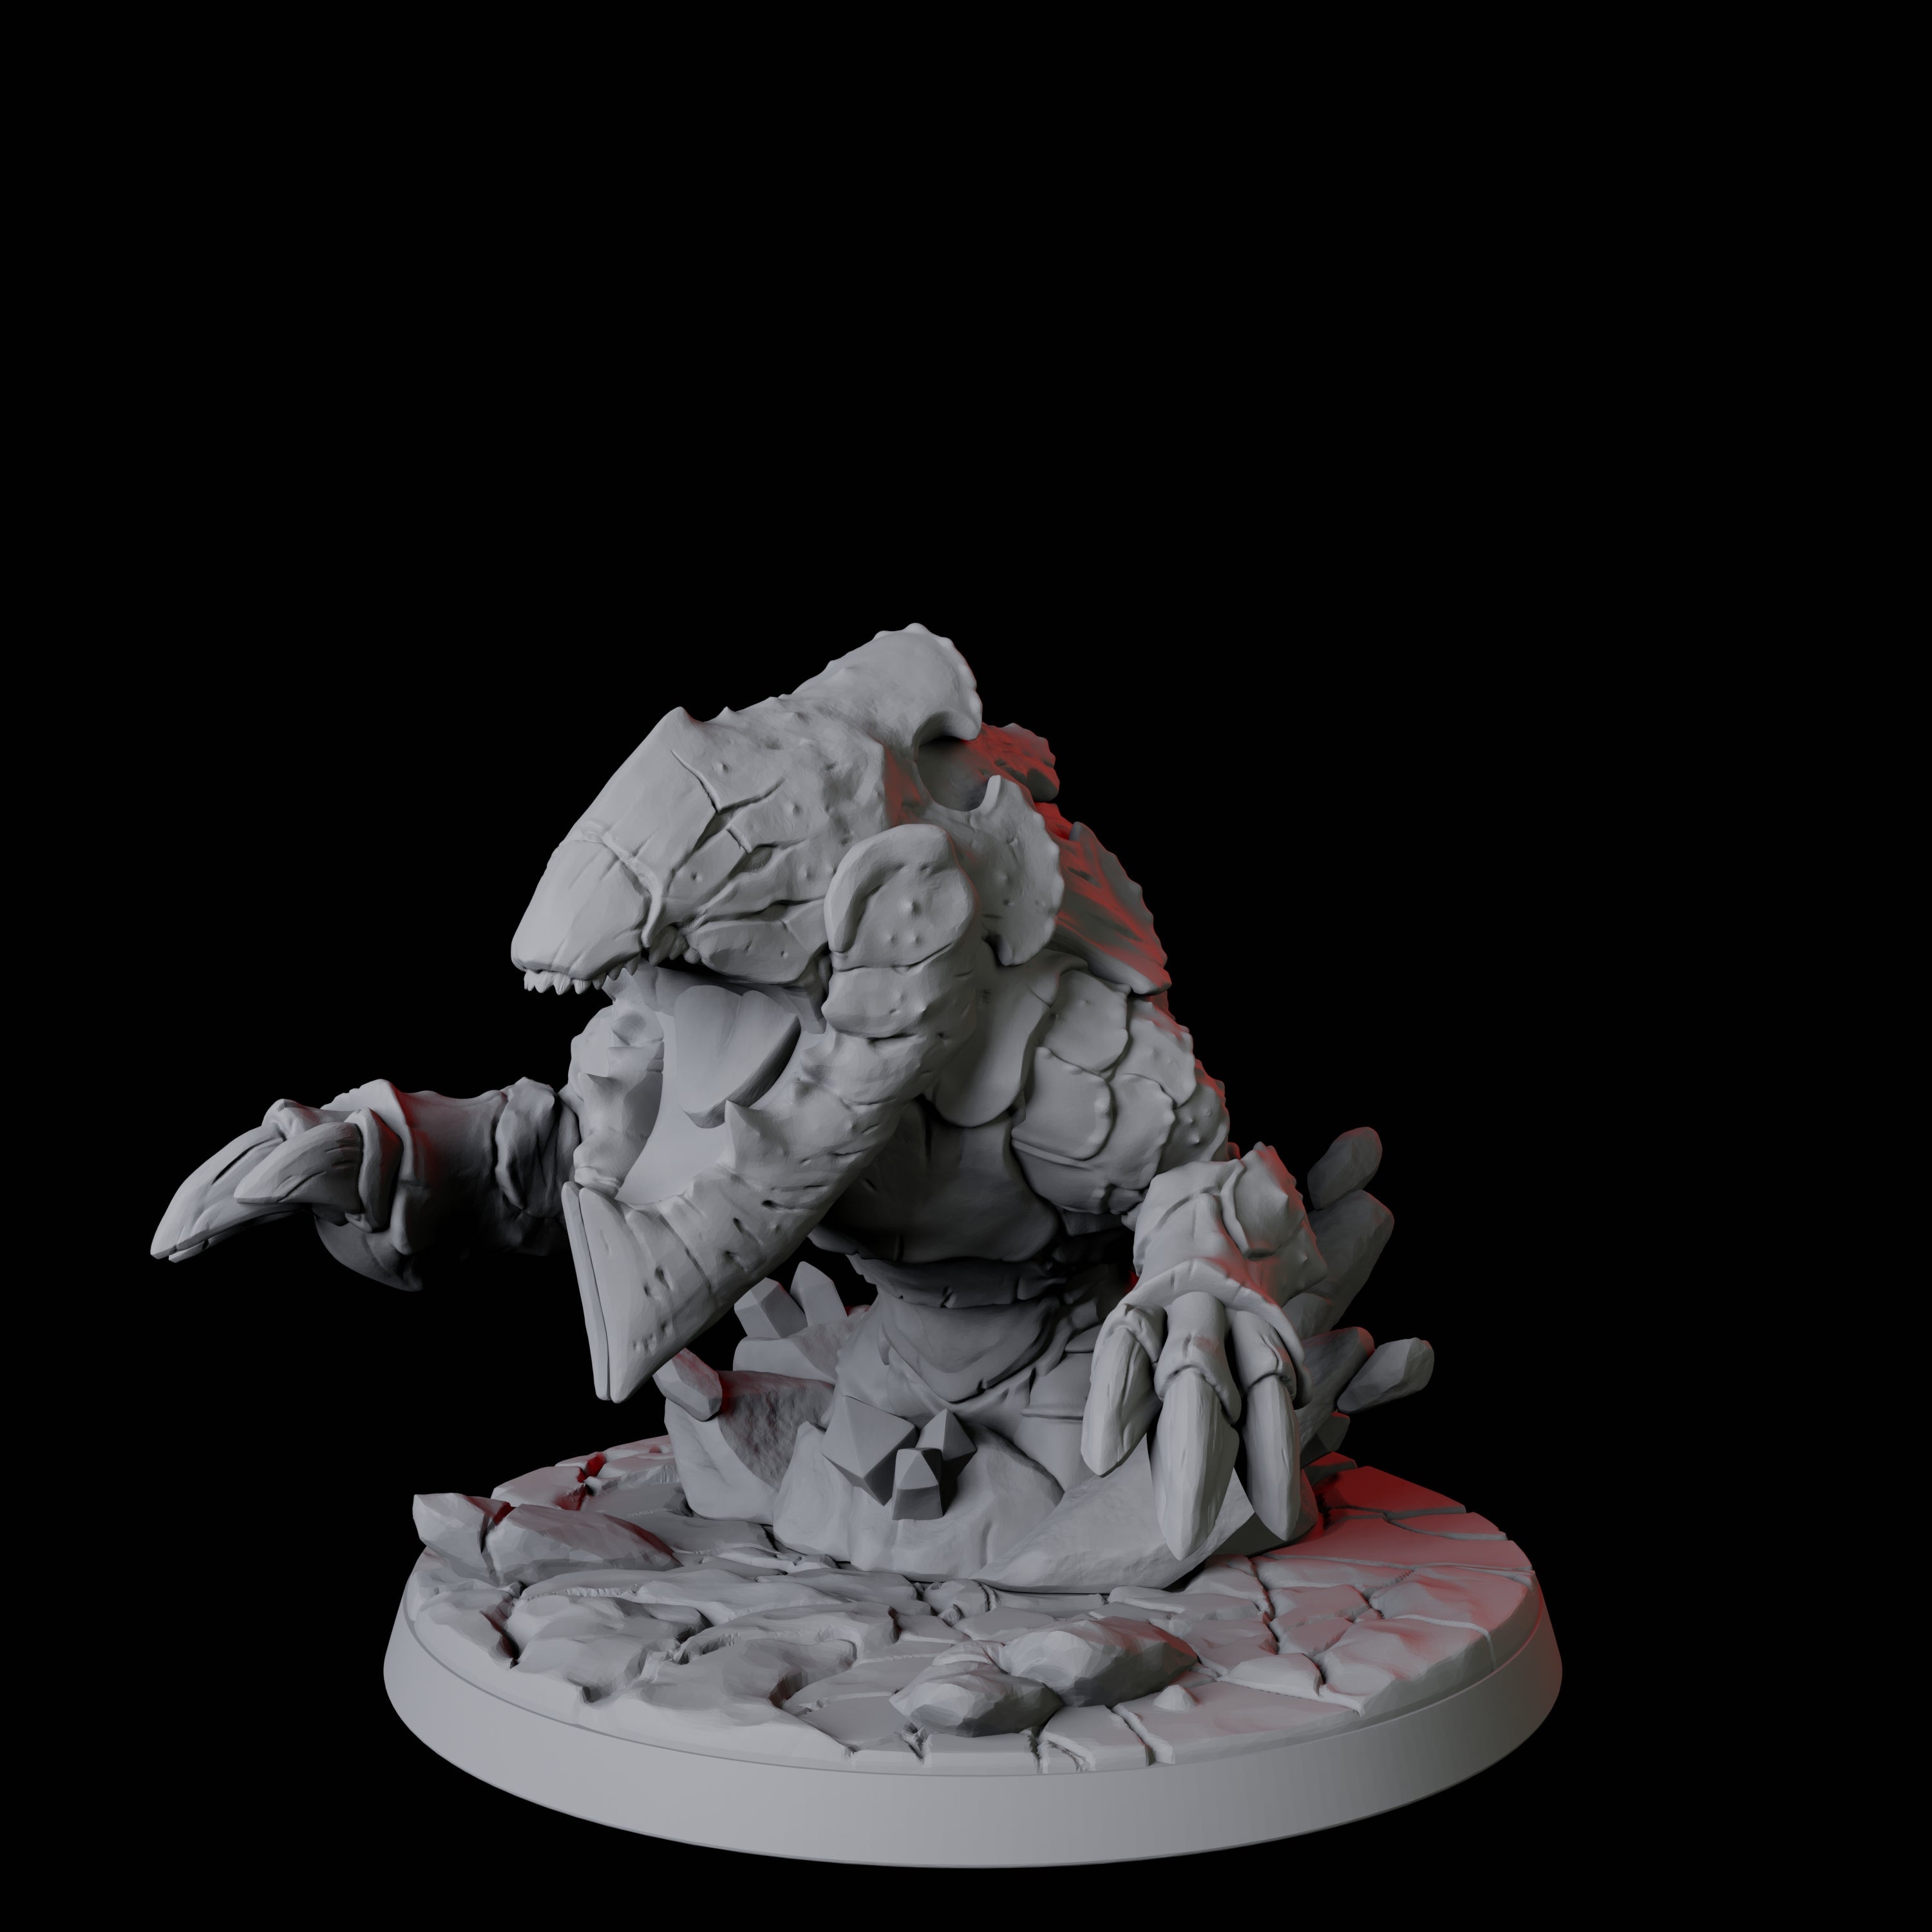 Burrowing Bulette C Miniature for Dungeons and Dragons, Pathfinder or other TTRPGs